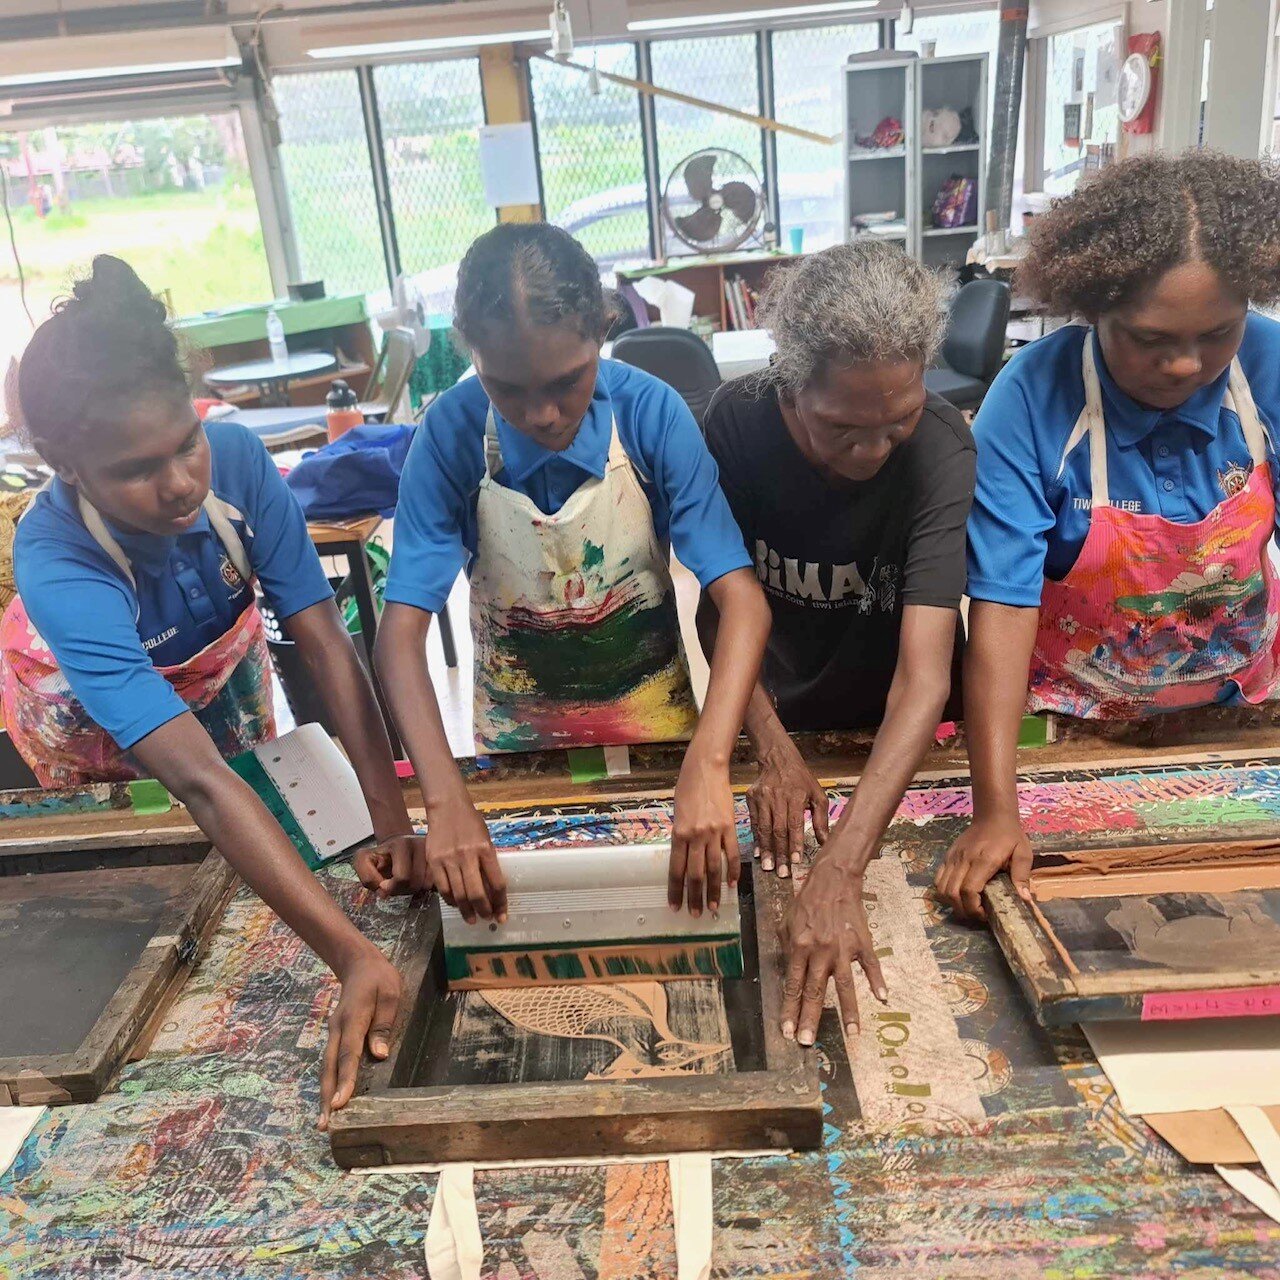 The JYW had a wonderful day visiting Bima Wear for an excursion on their subject Design and Technologies, the topic was Textile Materials Process and Production.

The young women were able to obtain information on designing textile items and observin